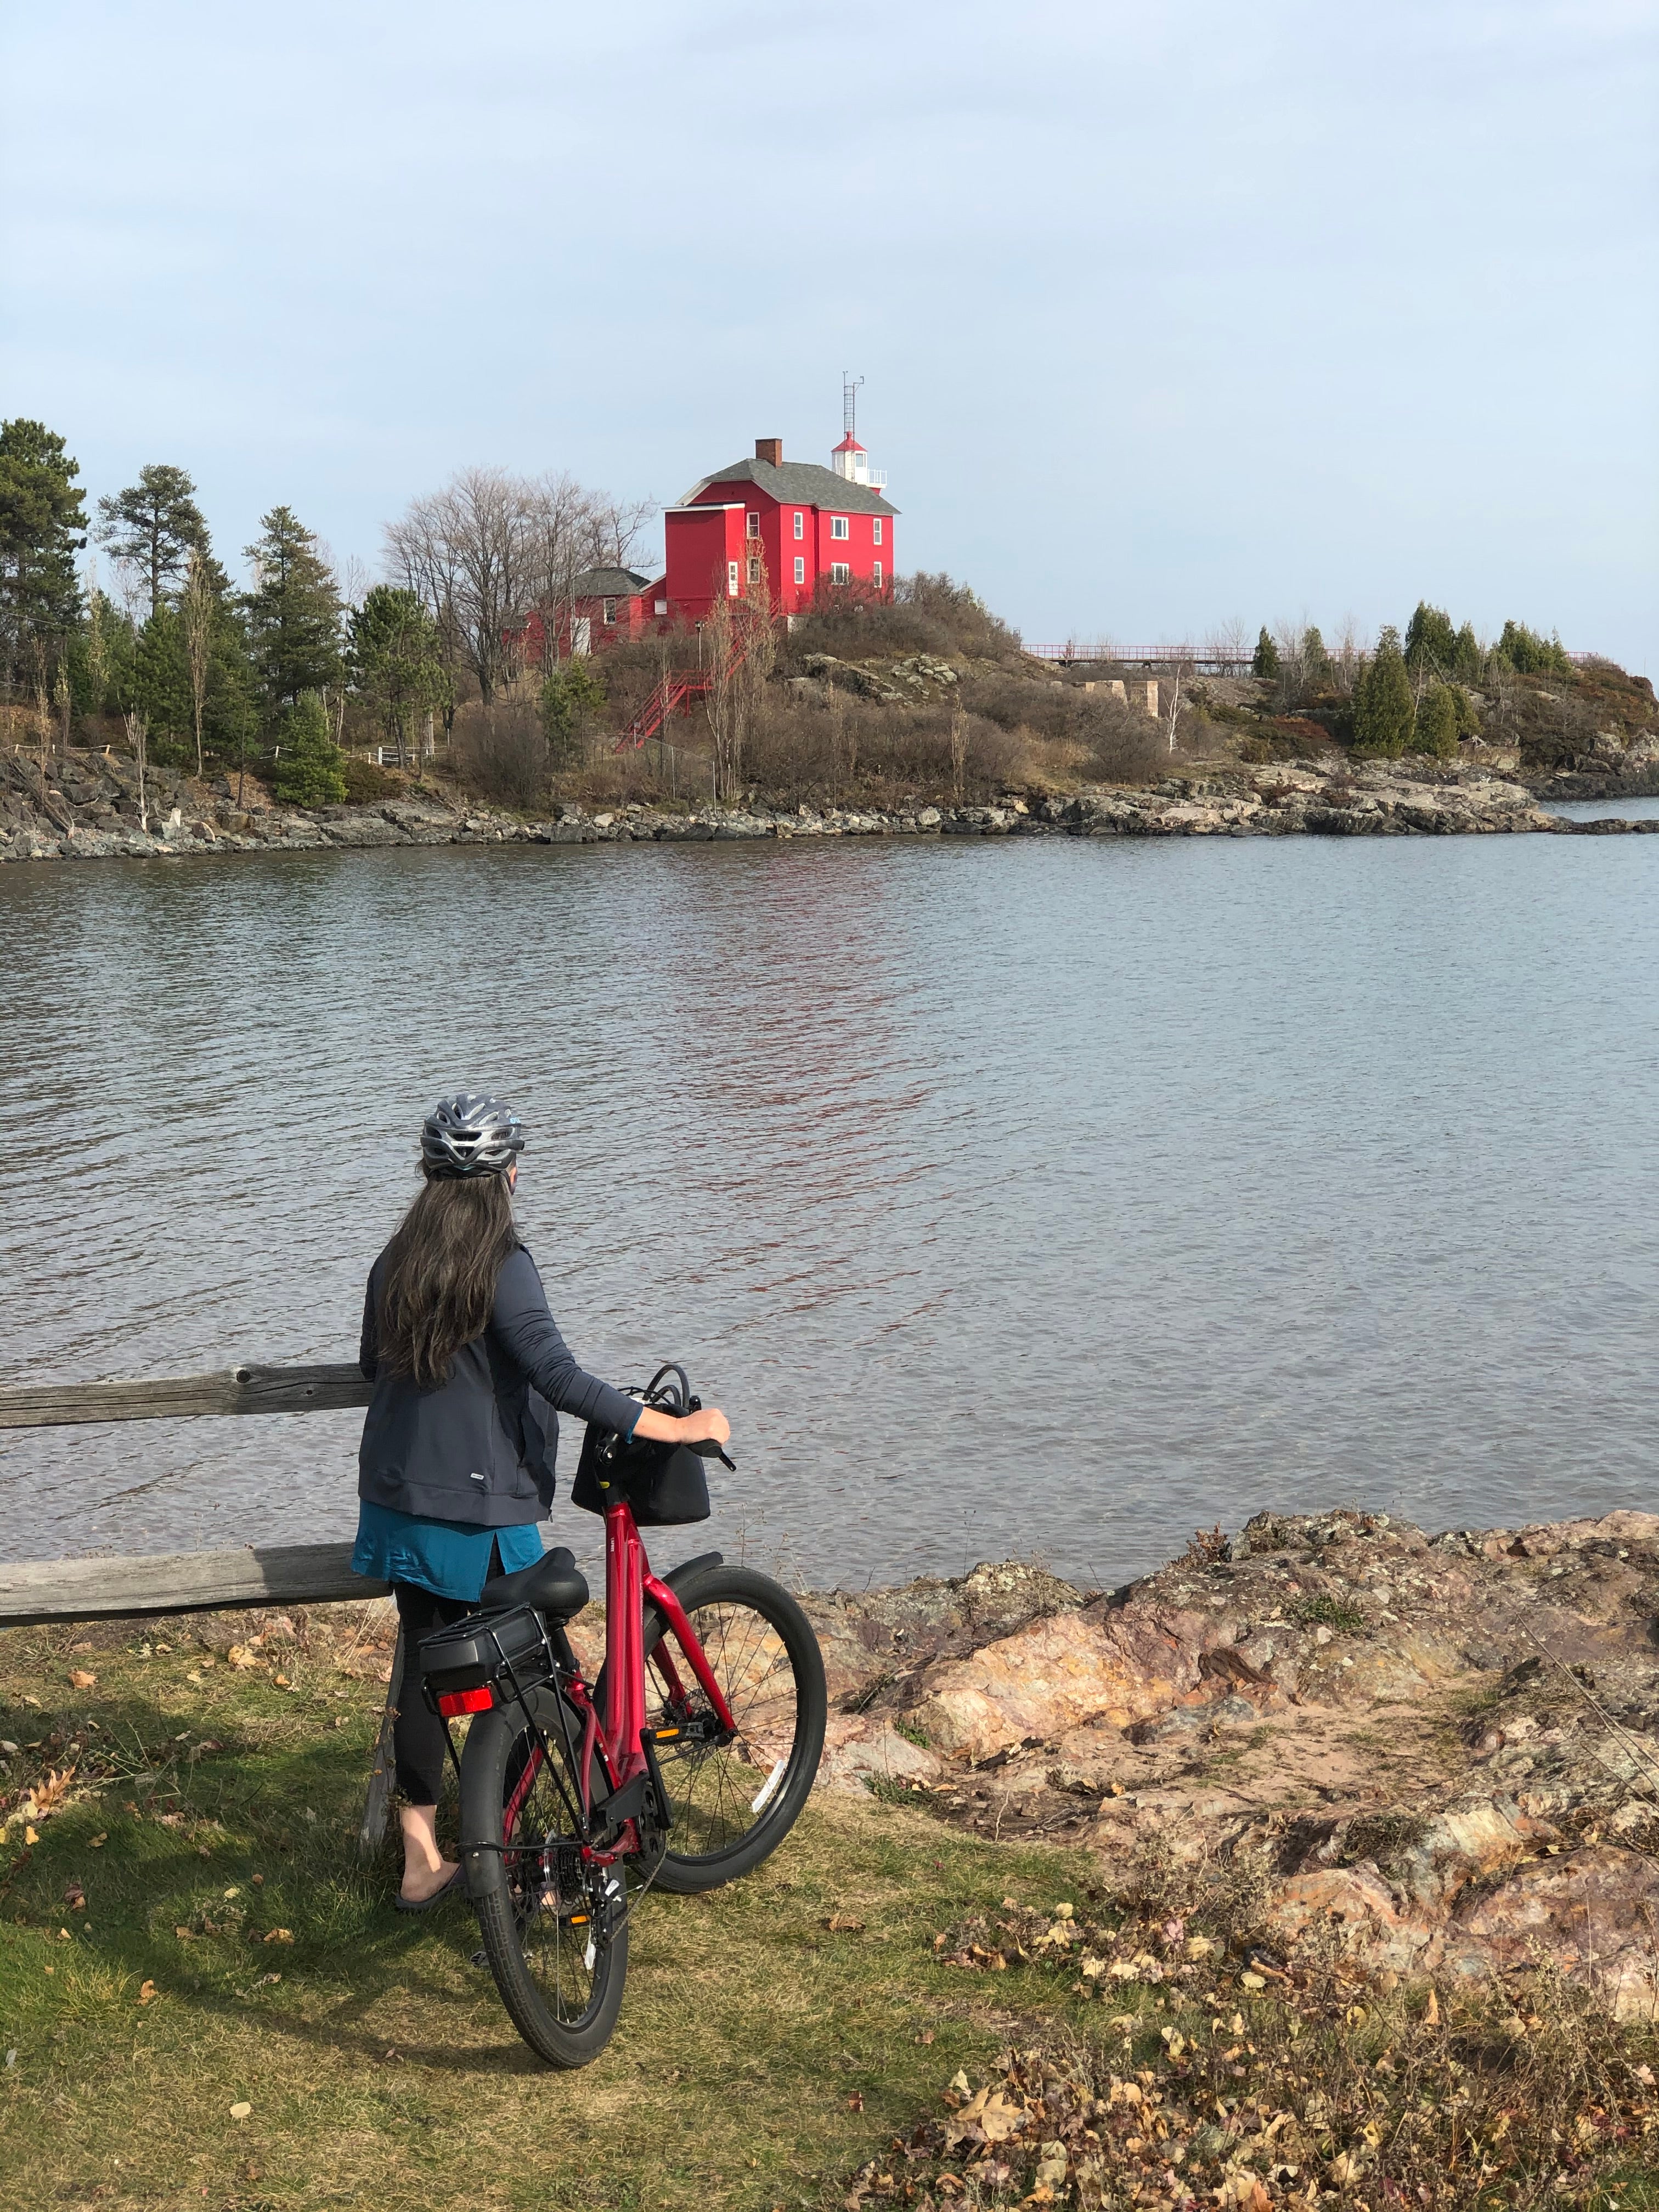 Riding an eBike in front of the red lighthouse in Marquete Michigan